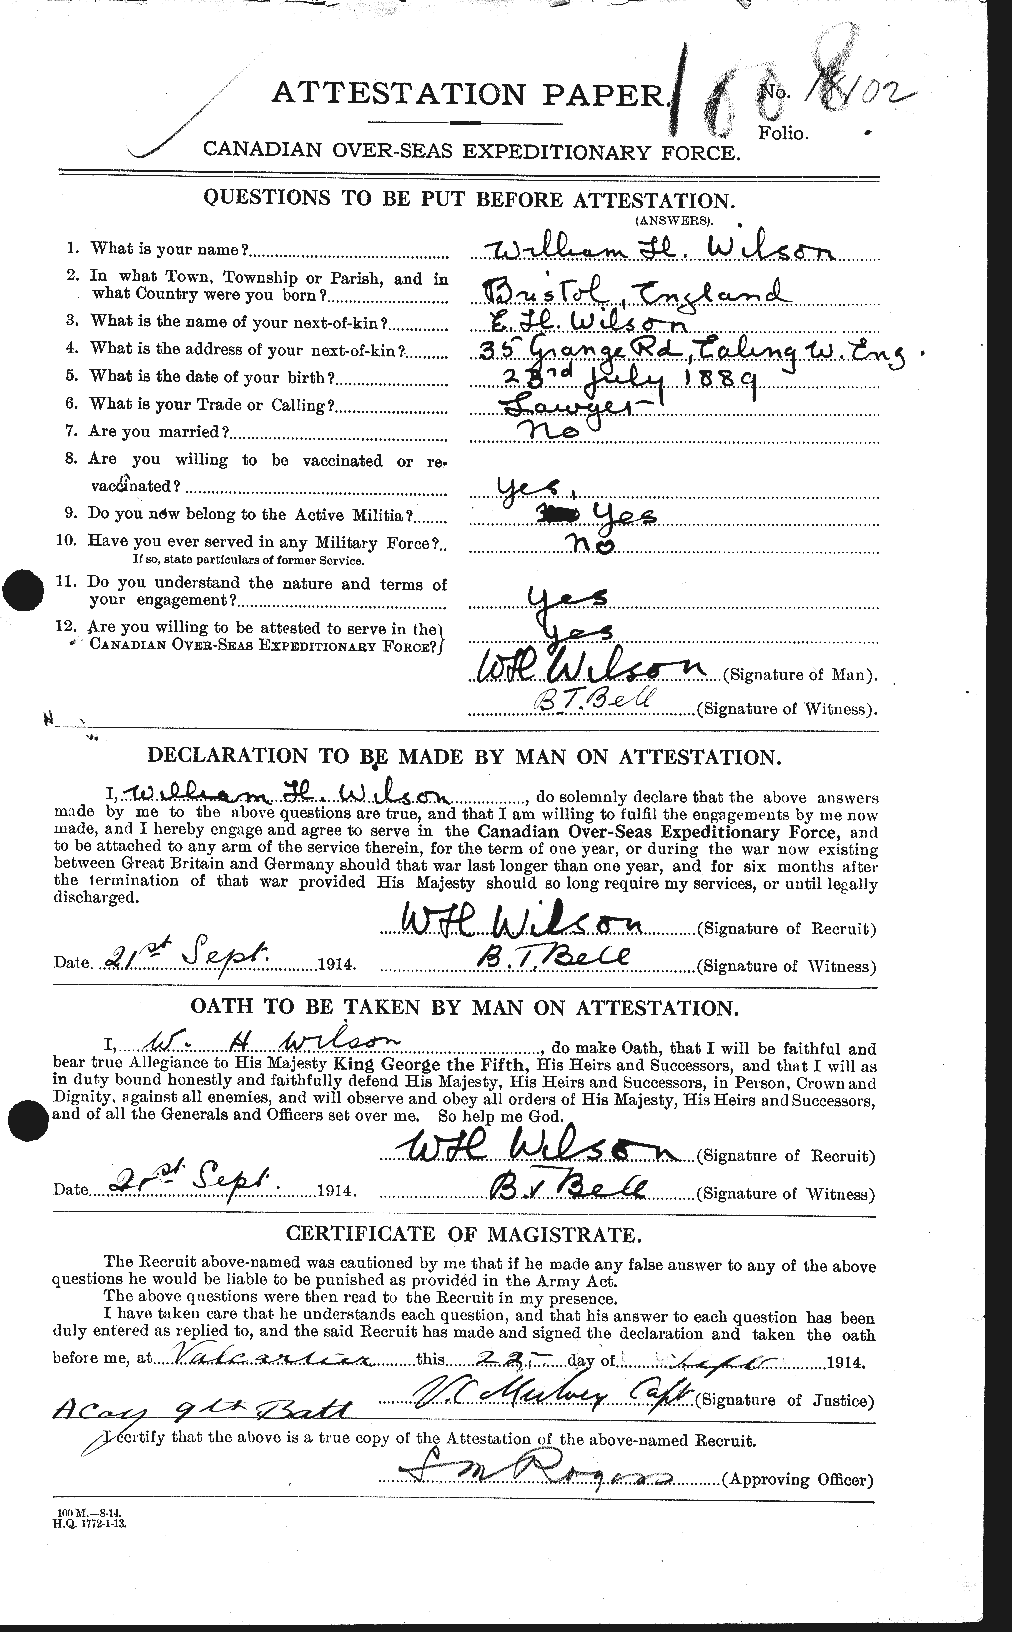 Personnel Records of the First World War - CEF 682008a